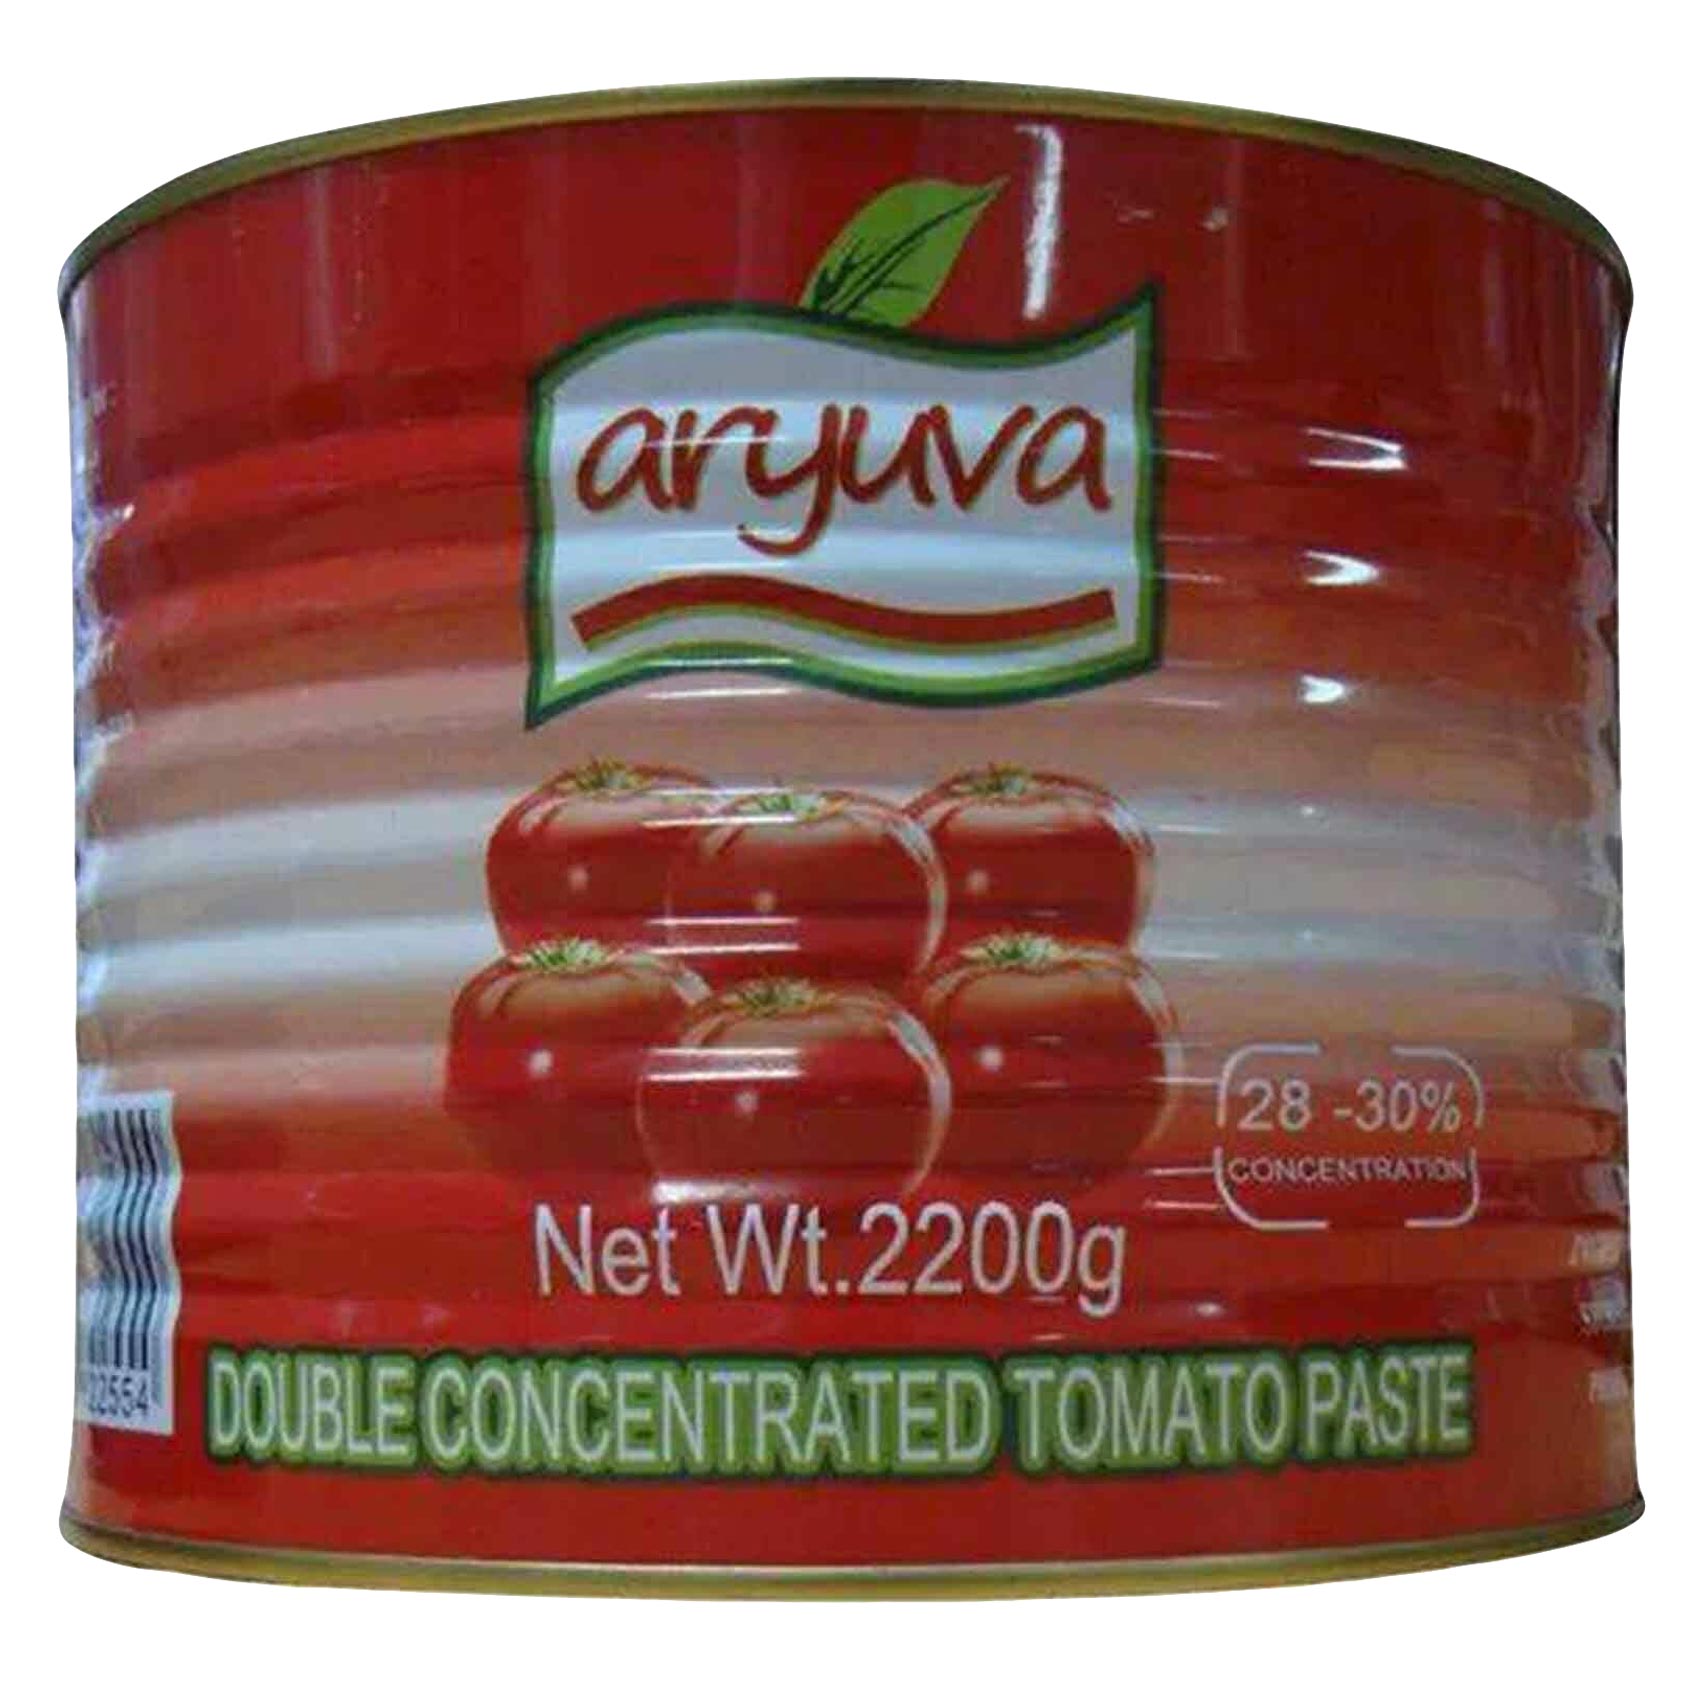 Aryuva Double Concentrated Tomato Paste 2.2Kg